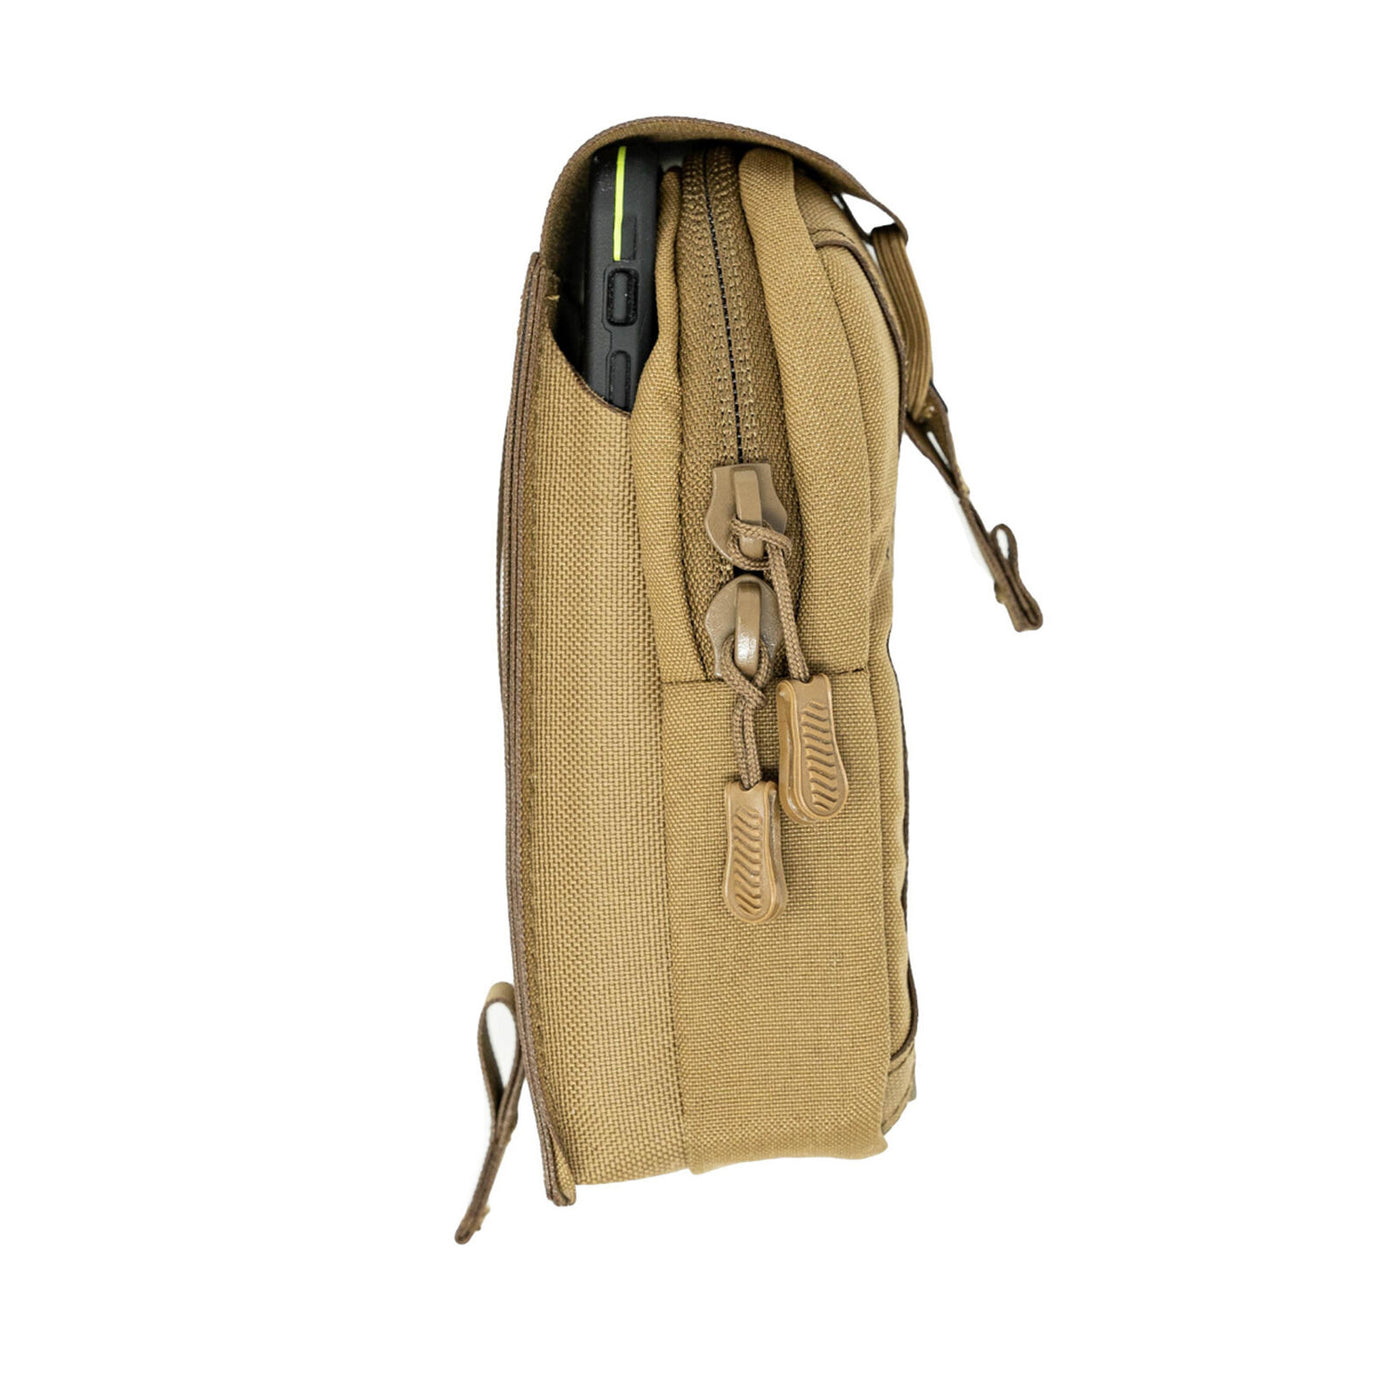 FHF Gear NAV Pouch in Coyote Brown